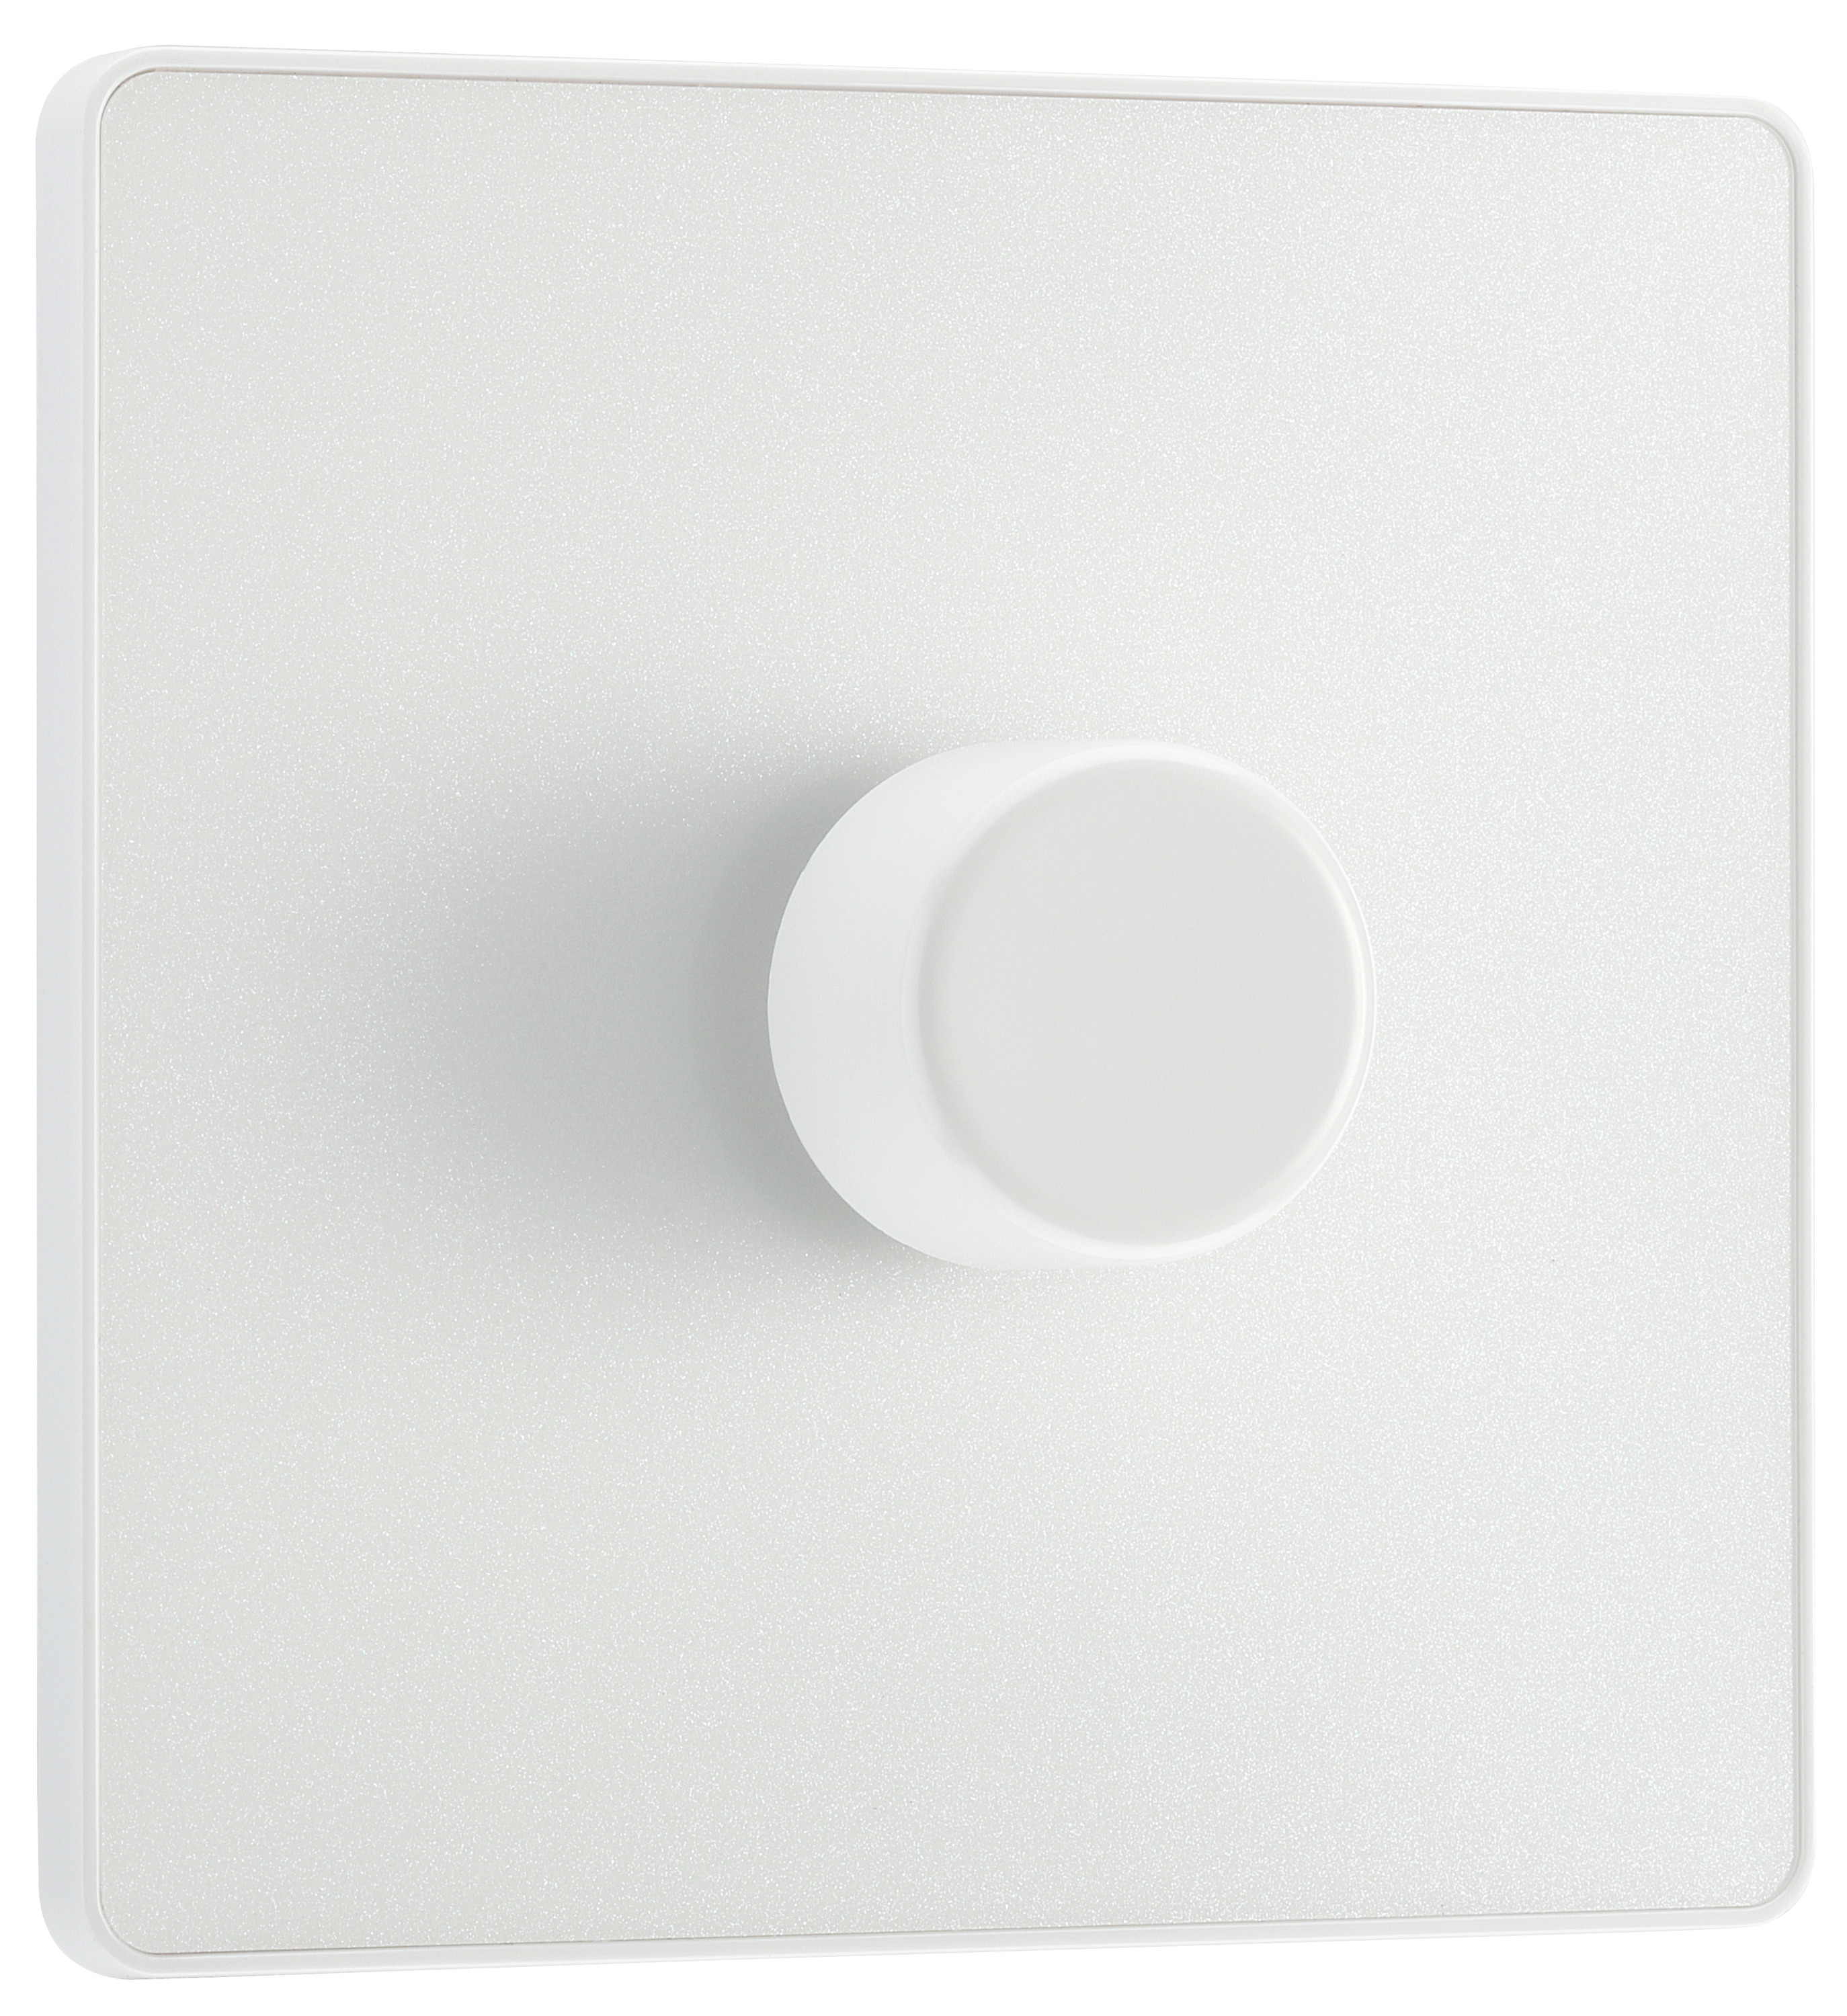 BG Evolve Pearlescent White Trailing Edge Led 2 Way Push On / Off Single Dimmer Switch - 200W